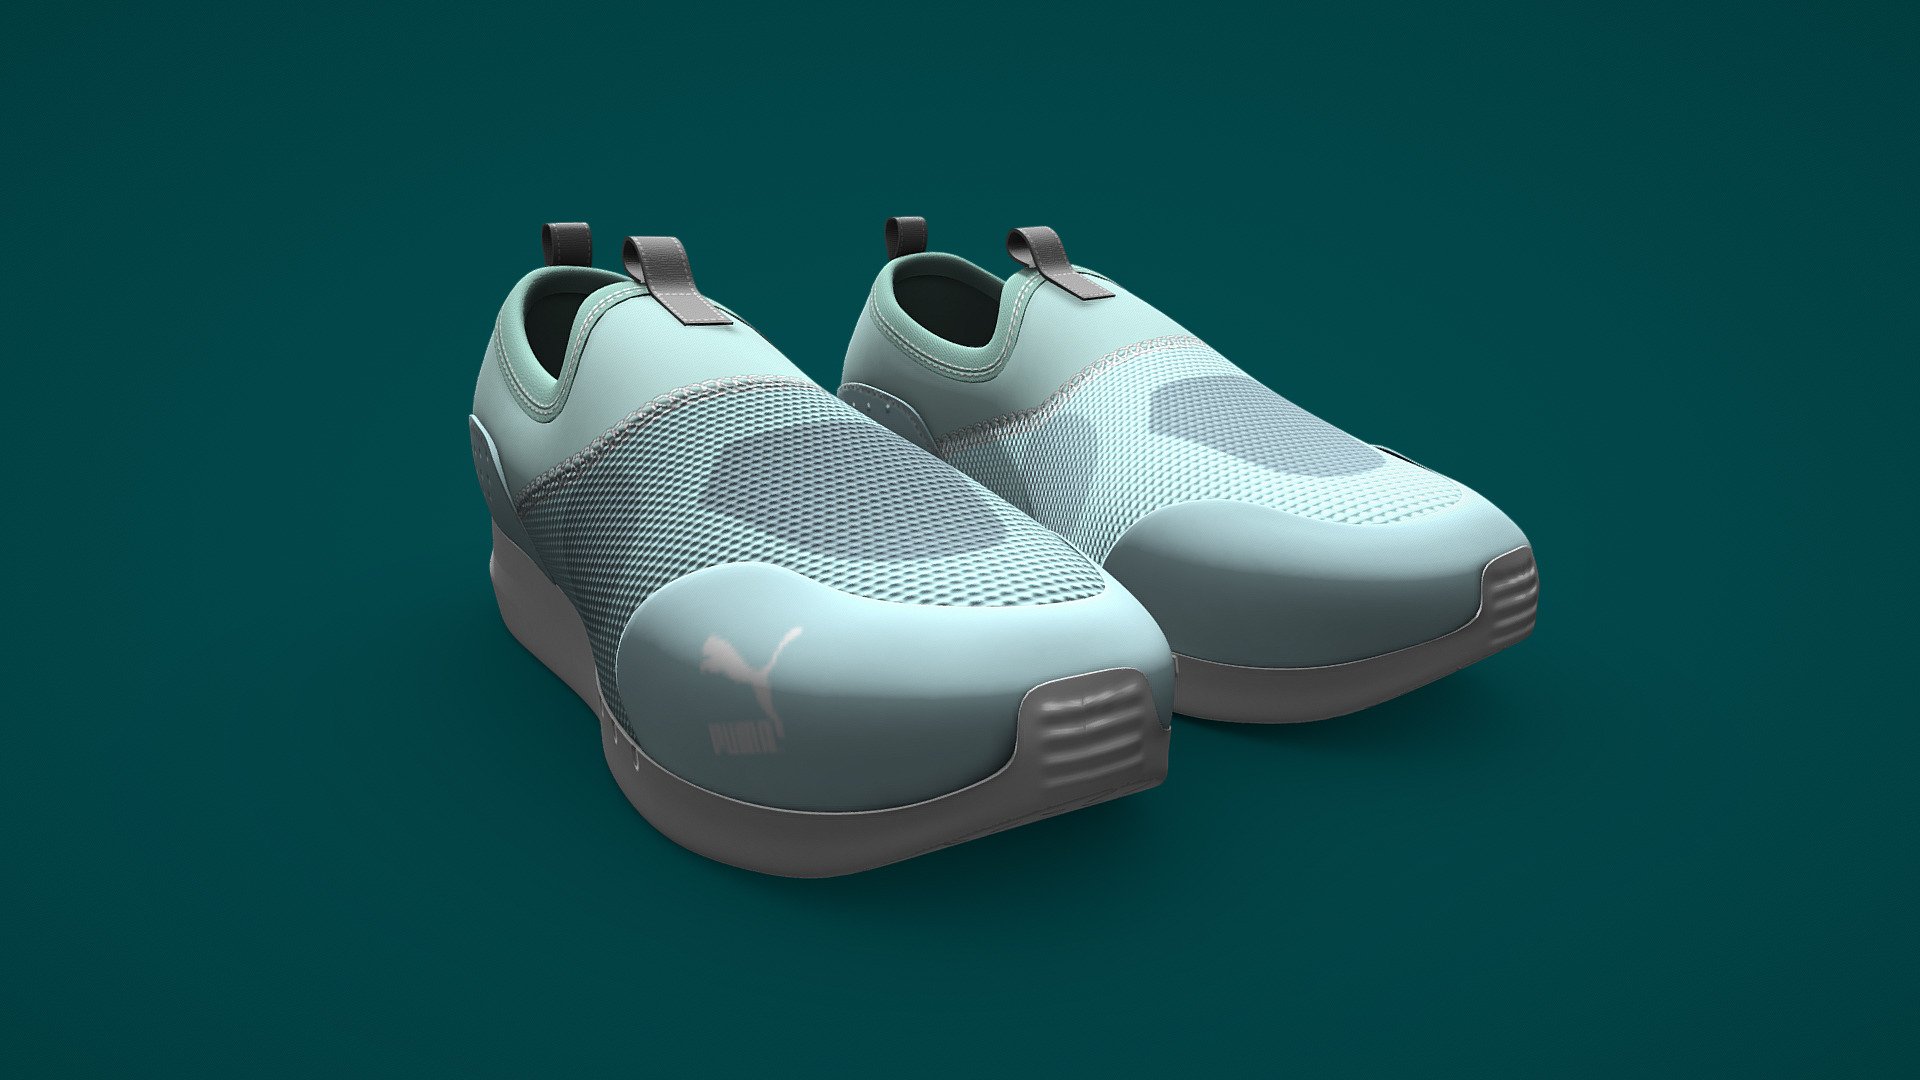 This high-quality 3D model represents a pair of Puma women's shoes, stylish and athletic footwear designed for comfort and performance. The model accurately depicts the physical design and features of Puma shoes tailored specifically for women.

The shoes are designed with a combination of sporty and fashion-forward aesthetics, featuring a low-top or mid-top silhouette. The model showcases the various components of the shoes, including the upper material, tongue, laces, eyelets, and the sole.

Whether you need it for fashion showcases, athletic visualizations, or any other creative project, this 3D model of Puma women's shoes will help you accurately visualize and showcase the footwear in a virtual environment.

Note: Please remember to respect intellectual property rights and ensure you have the necessary permissions to use and distribute any 3D models or designs based on copyrighted brands or products - Women Shoes - Puma - Buy Royalty Free 3D model by Sujit Mishra (@sujitanshumishra) 3d model